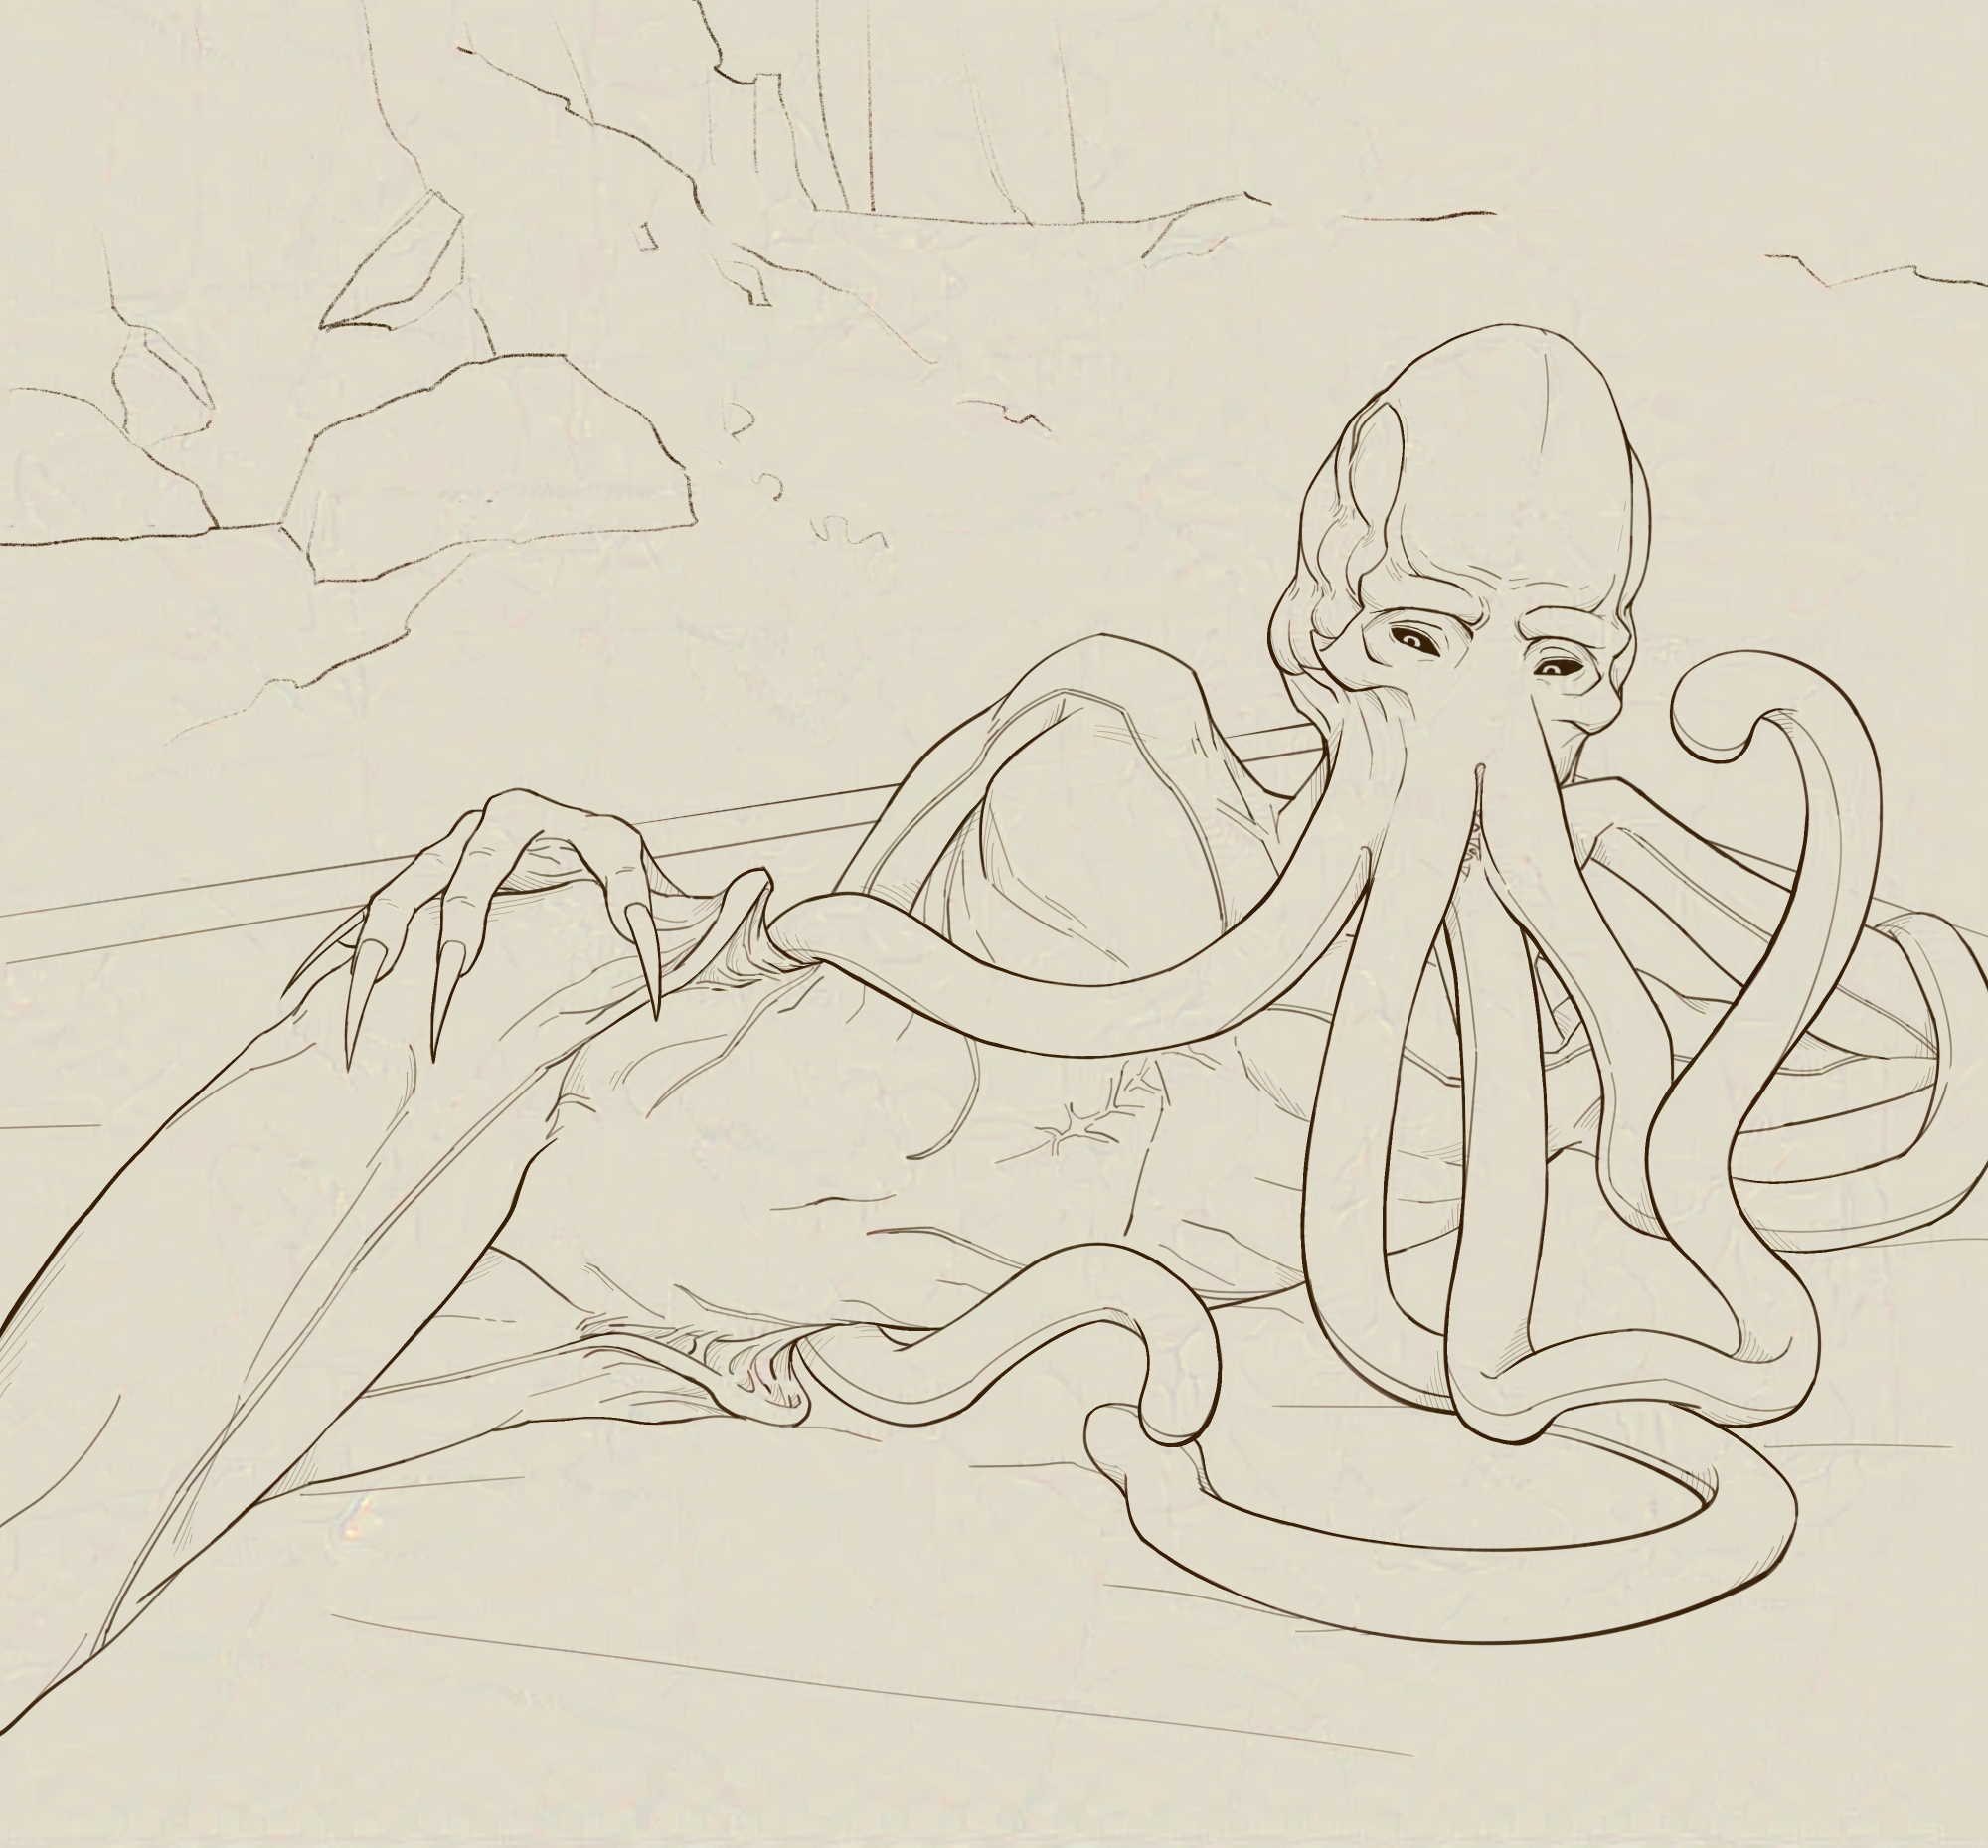 The Emperor (an illithid) is lying down on a rug at the astral plane. They look coy and inviting.